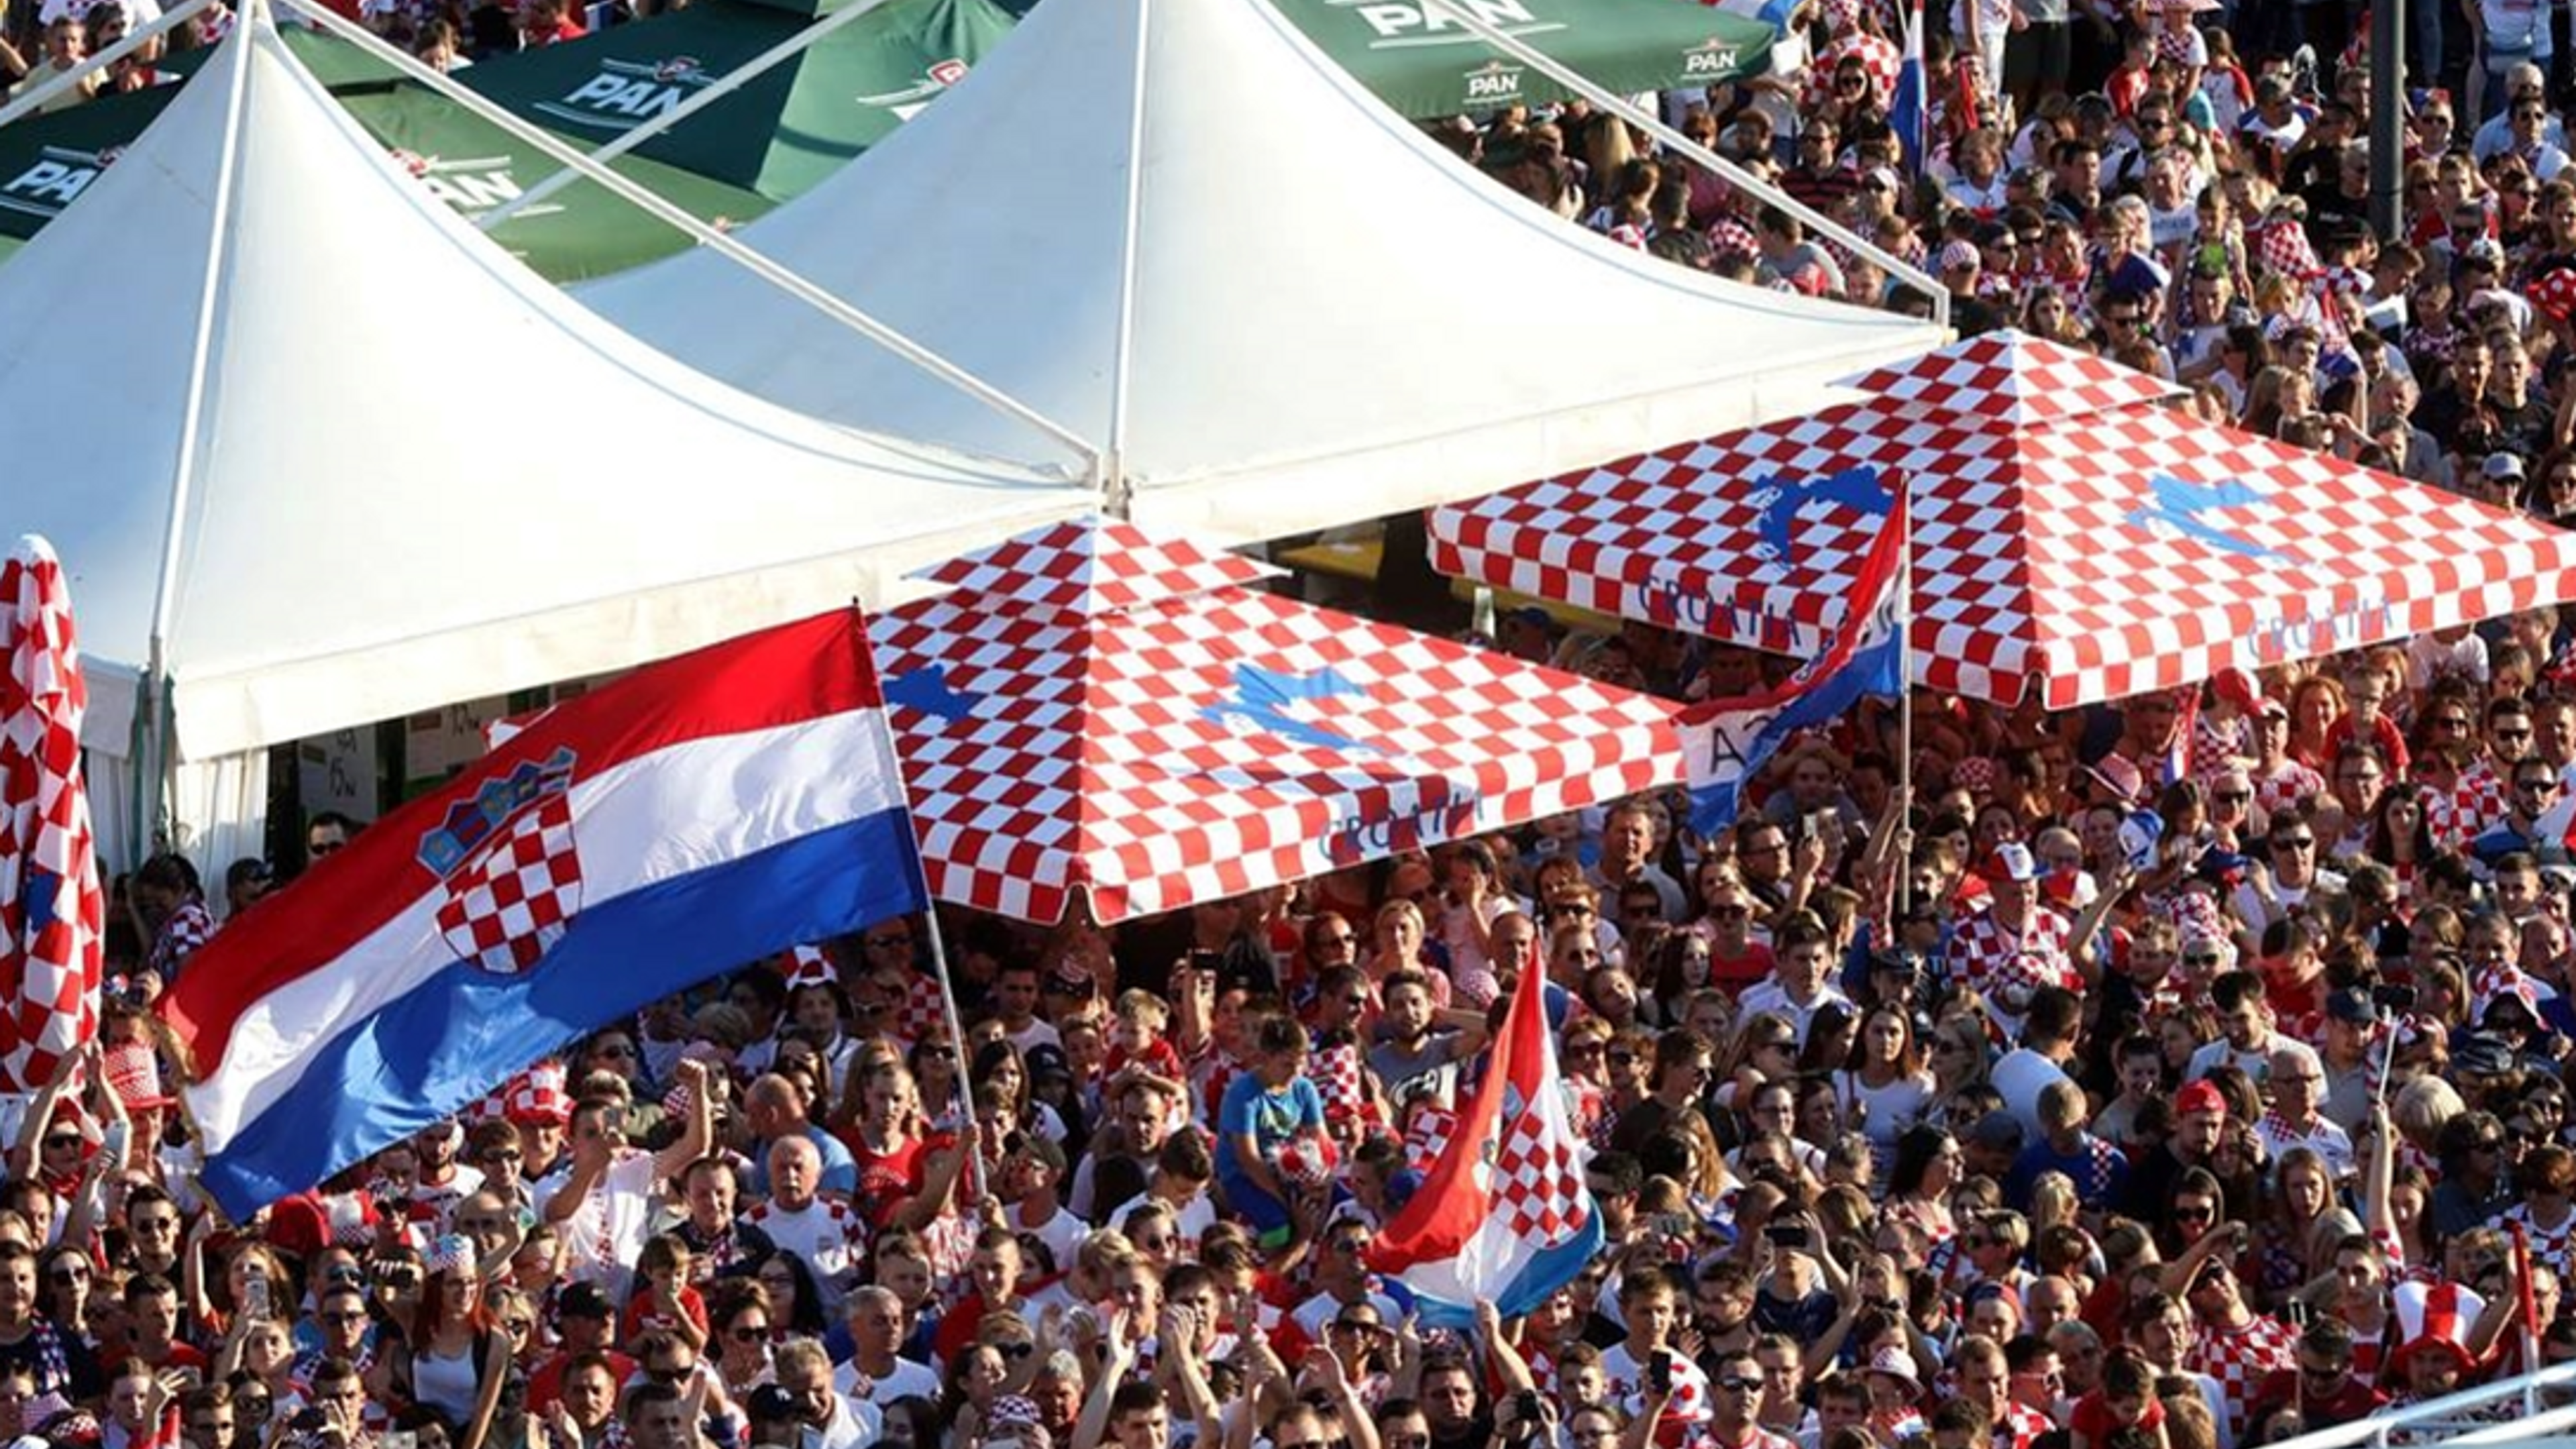 Mass of people with Croatian flags